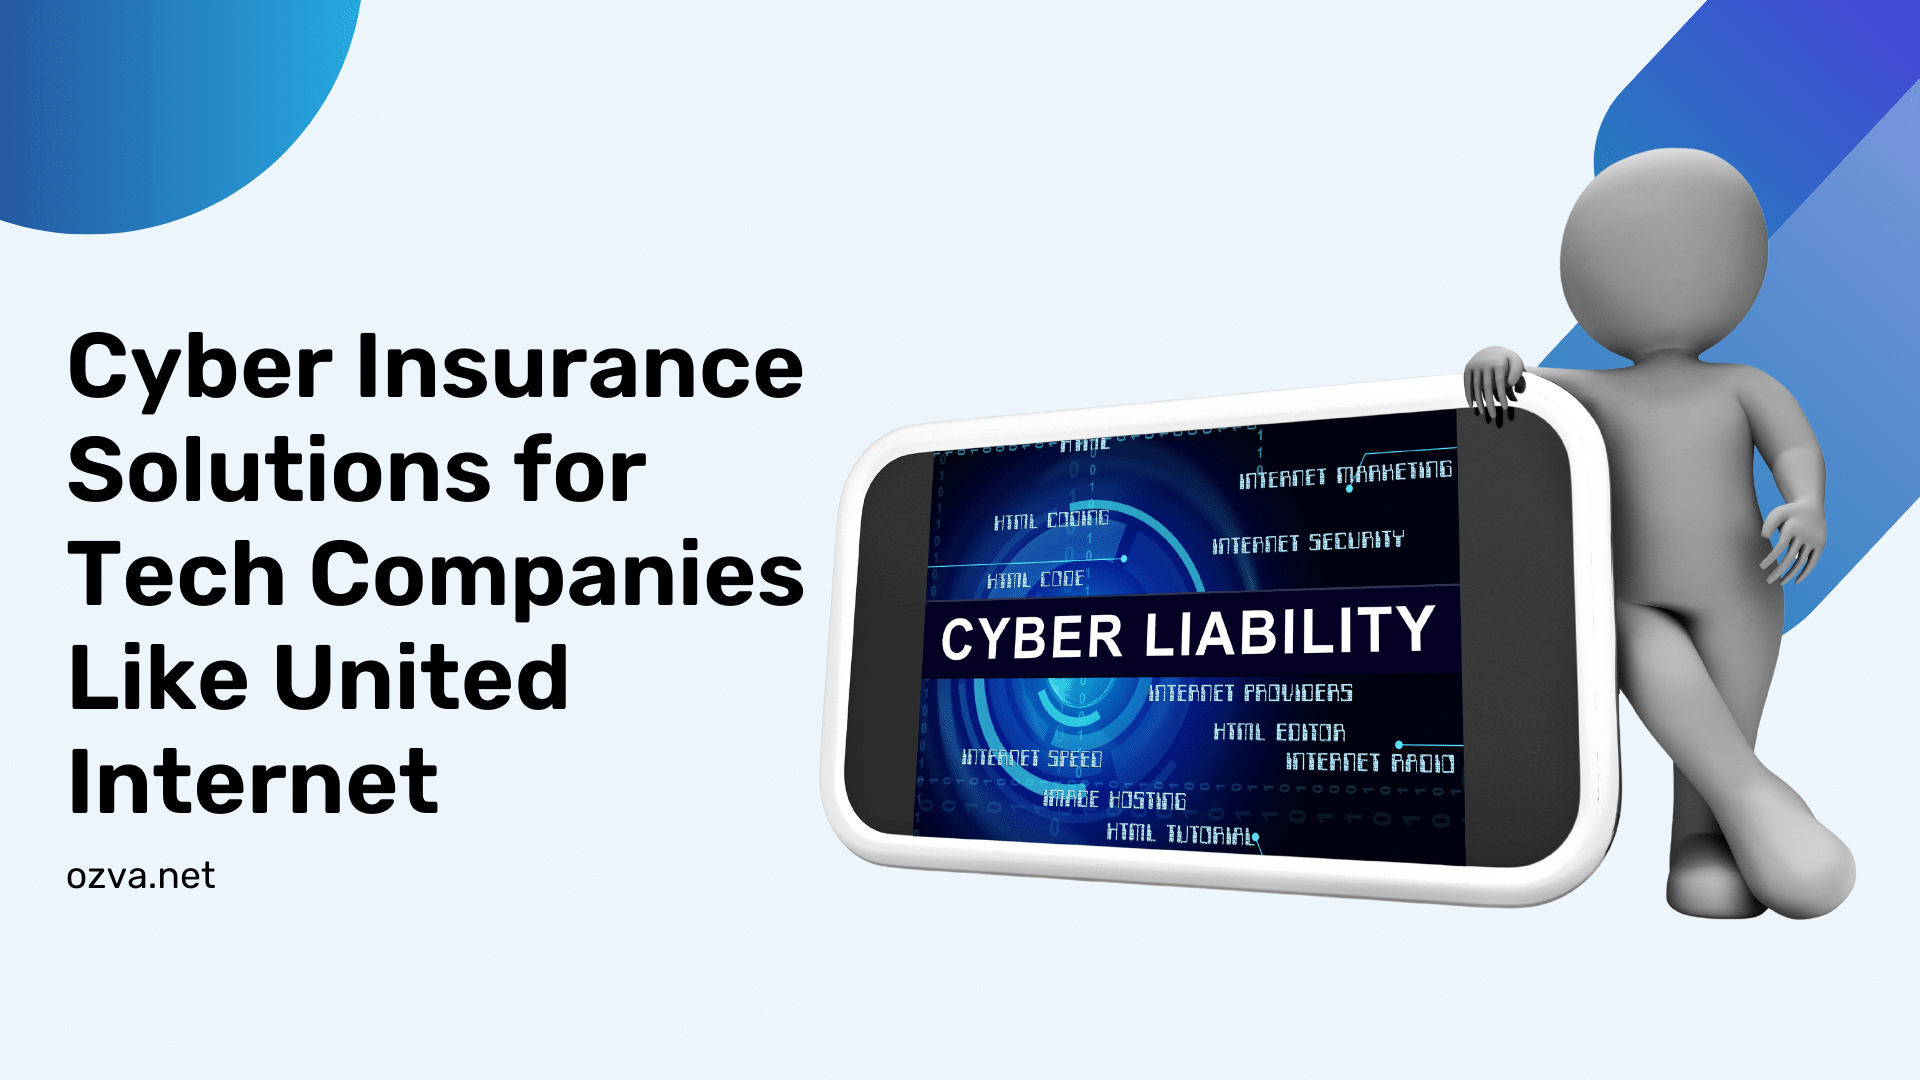 Cyber Insurance Solutions for Tech Companies Like United Internet